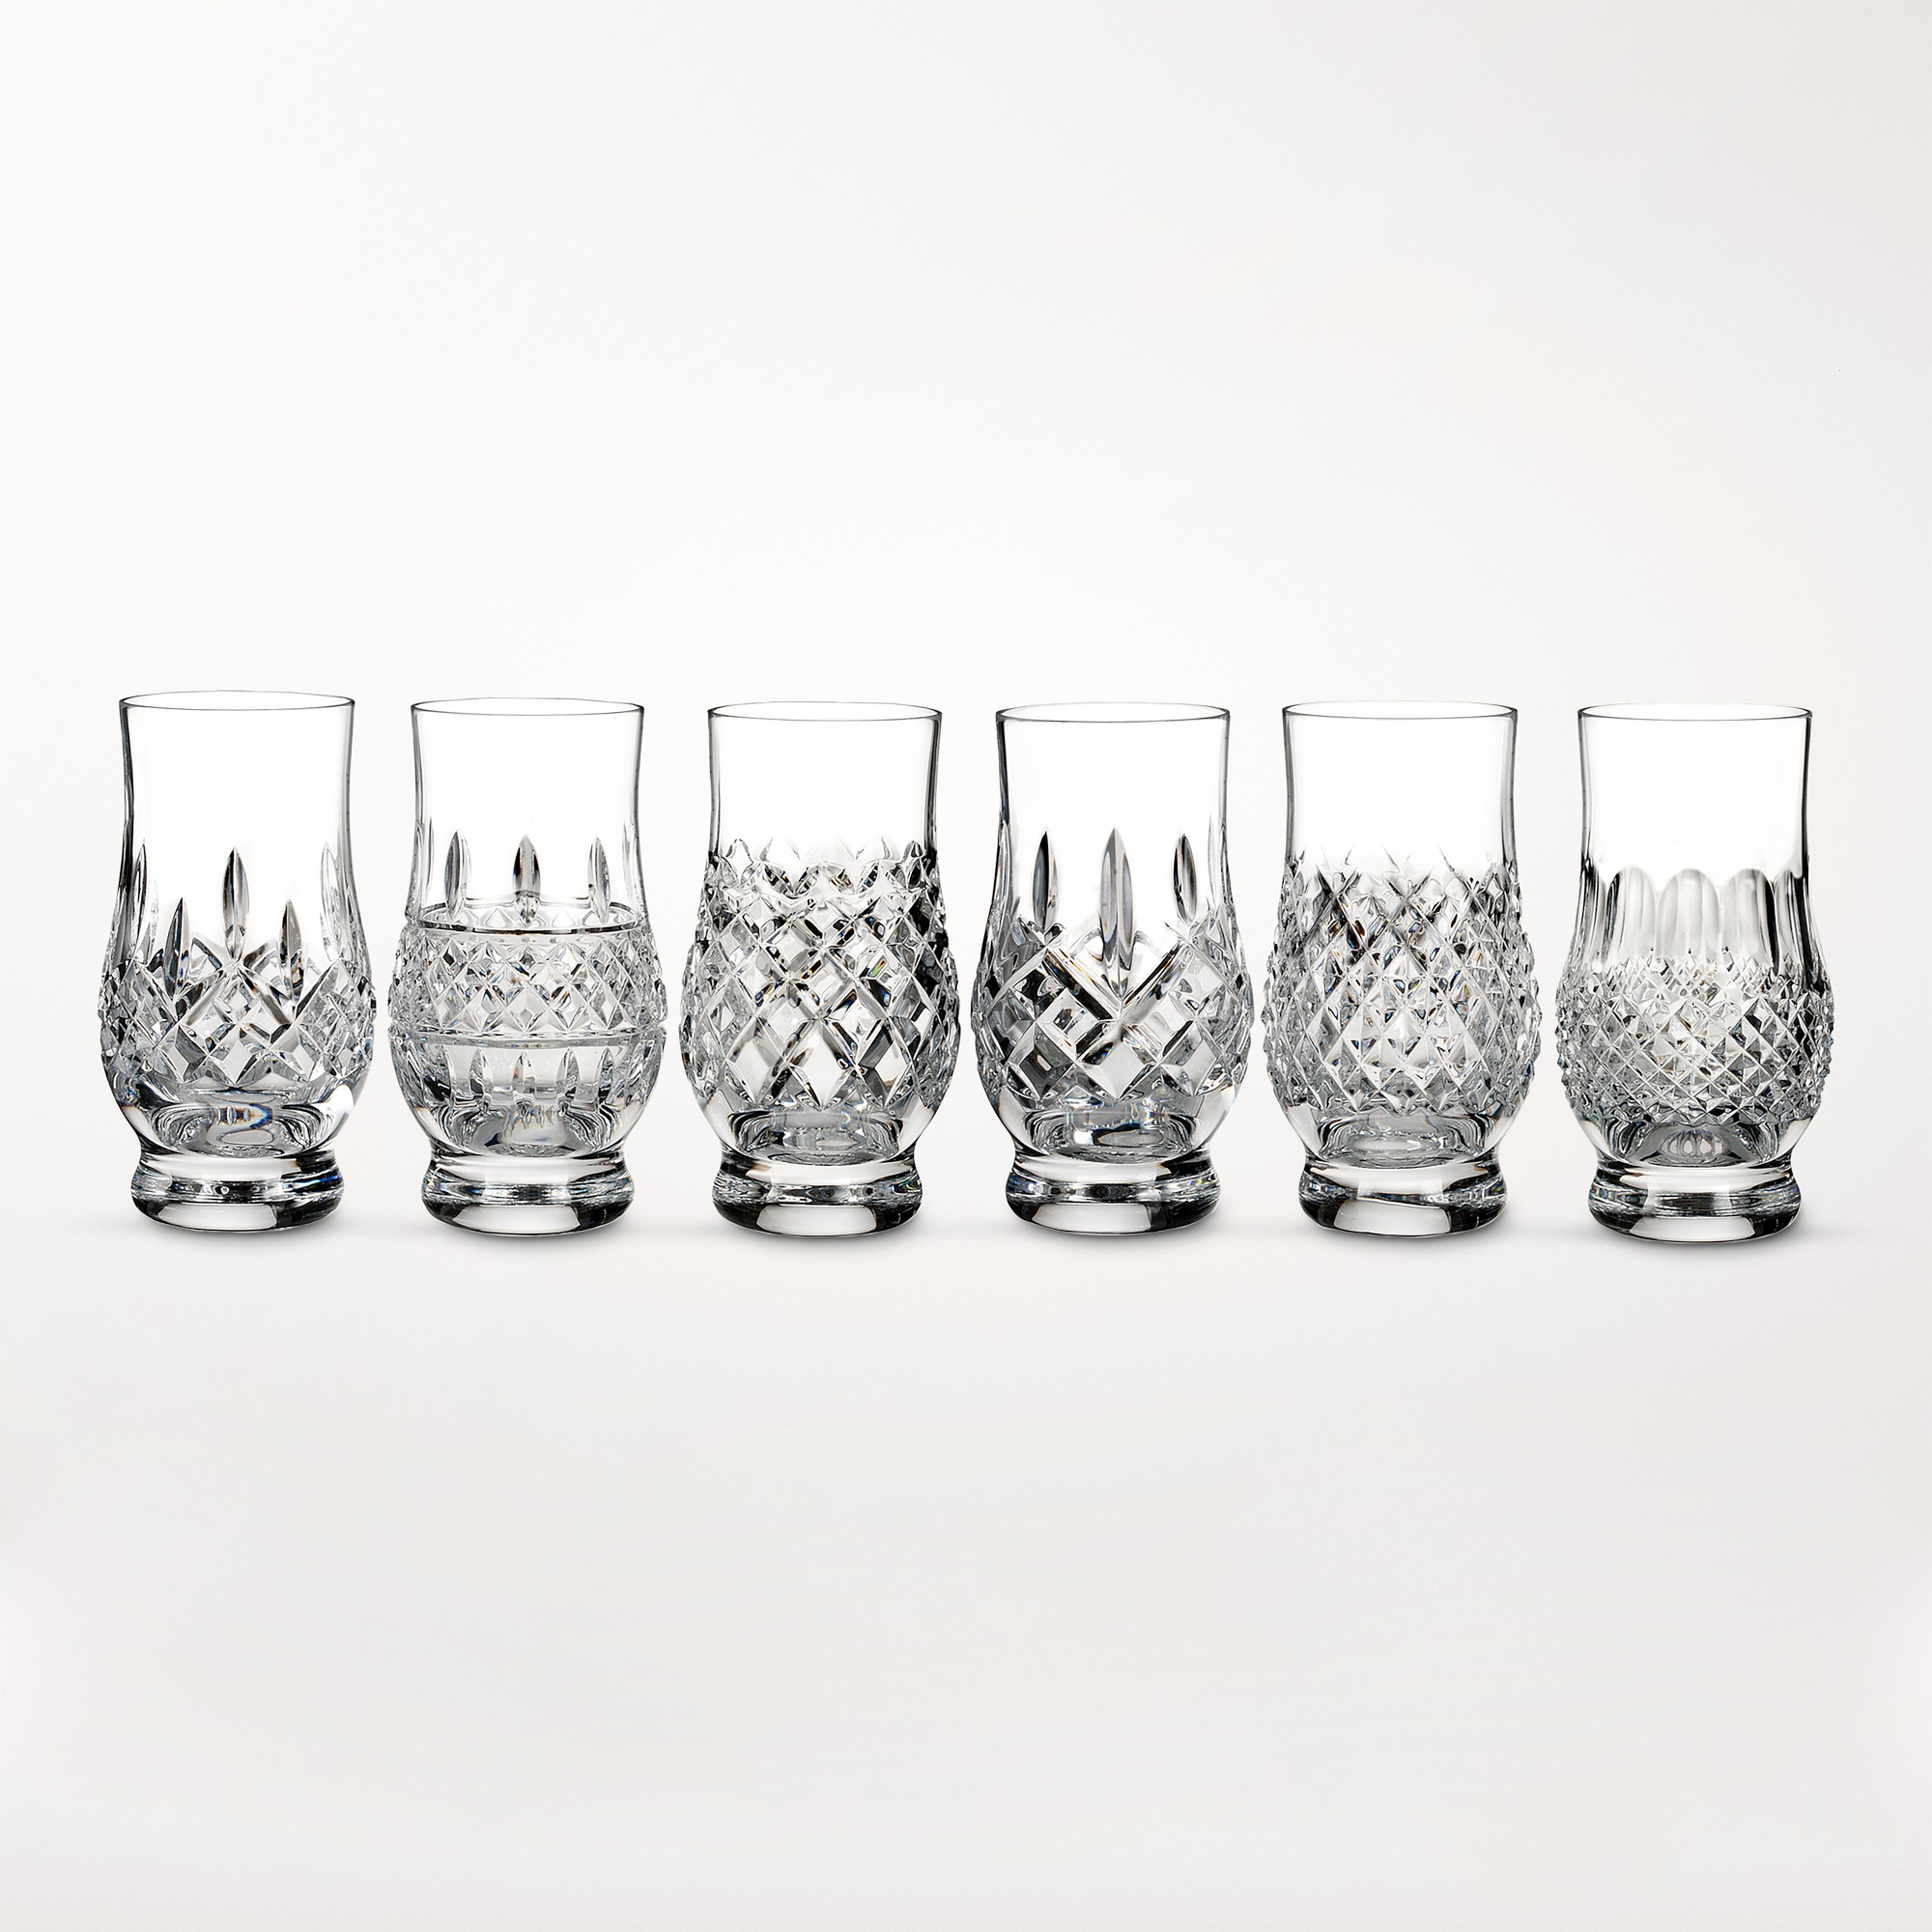 Waterford Lismore Connoisseur Heritage Footed Tumblers, Set of 6